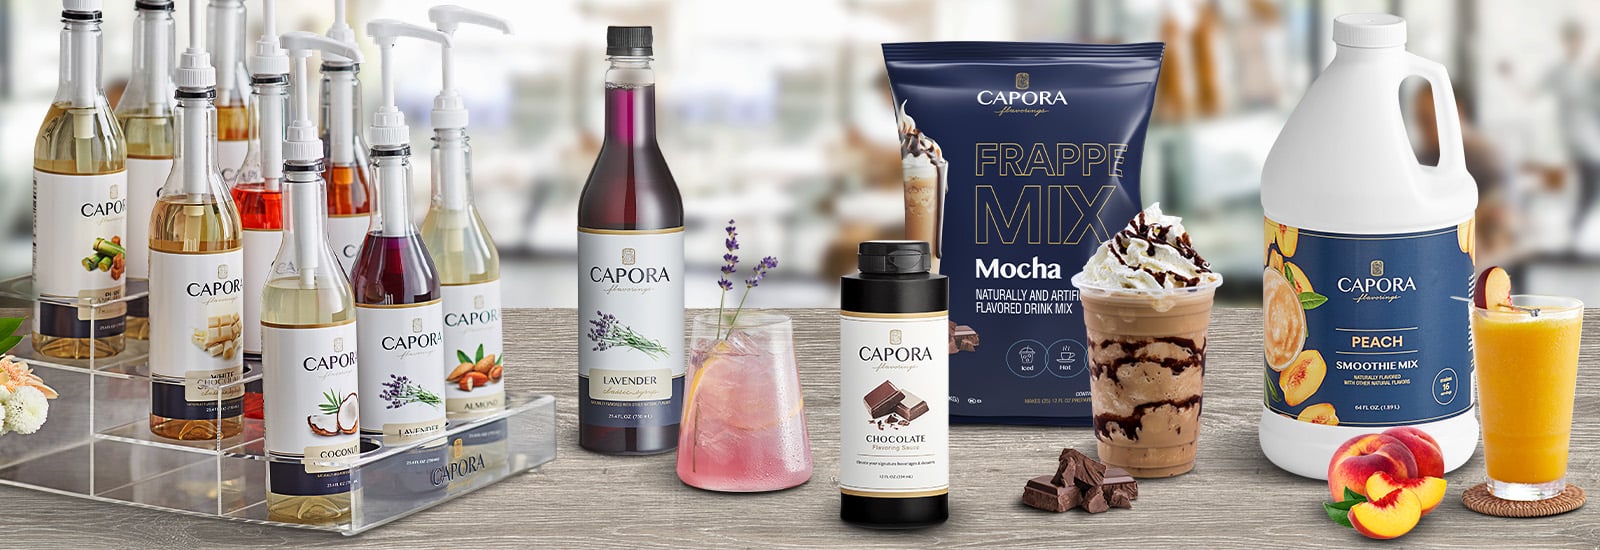 Capora Flavoring Products